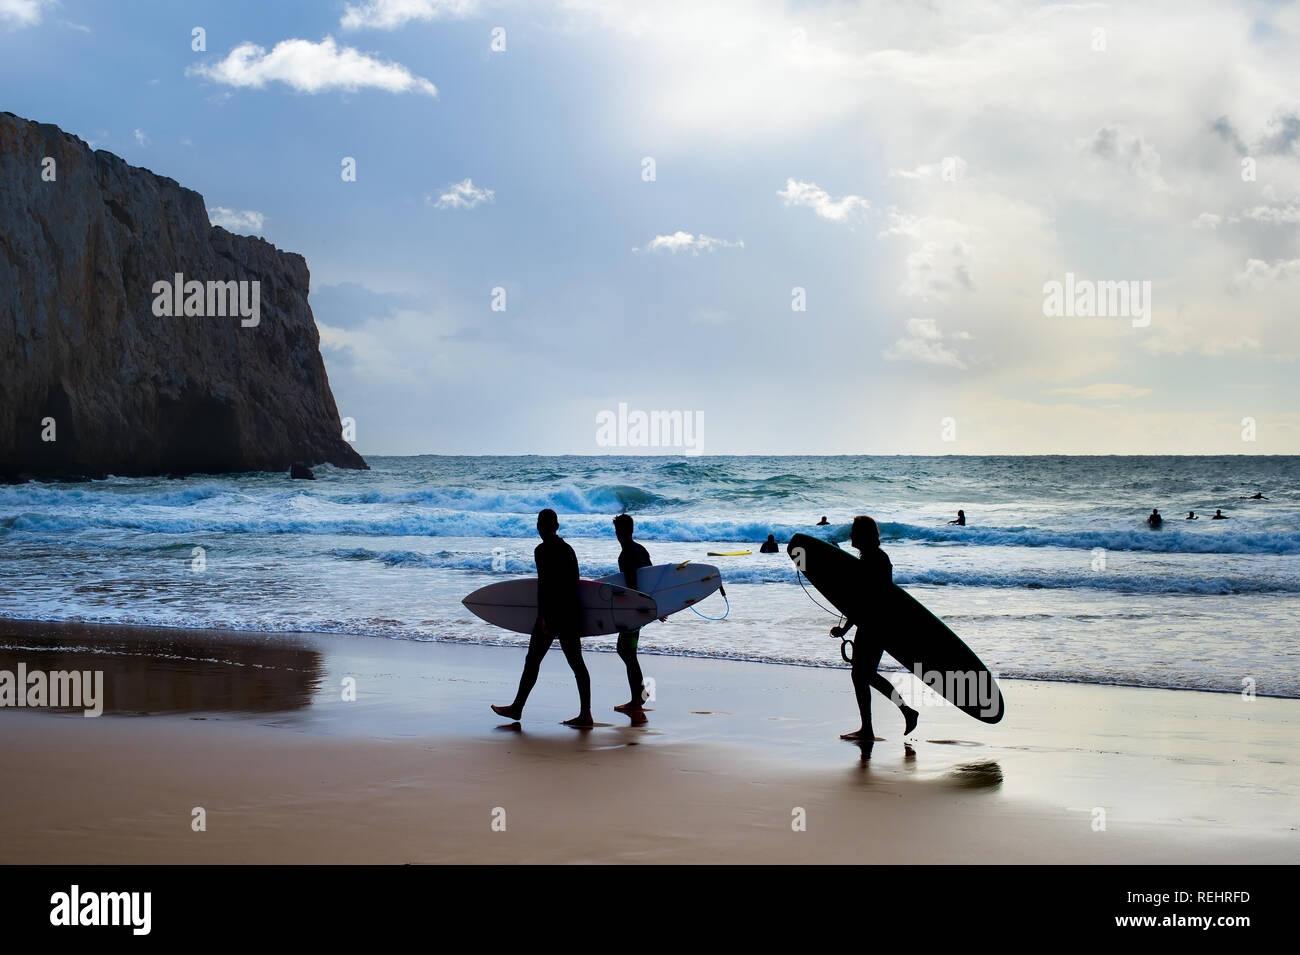 Group of surfers with surfboards on the beach. Algarve, Portugal Stock Photo